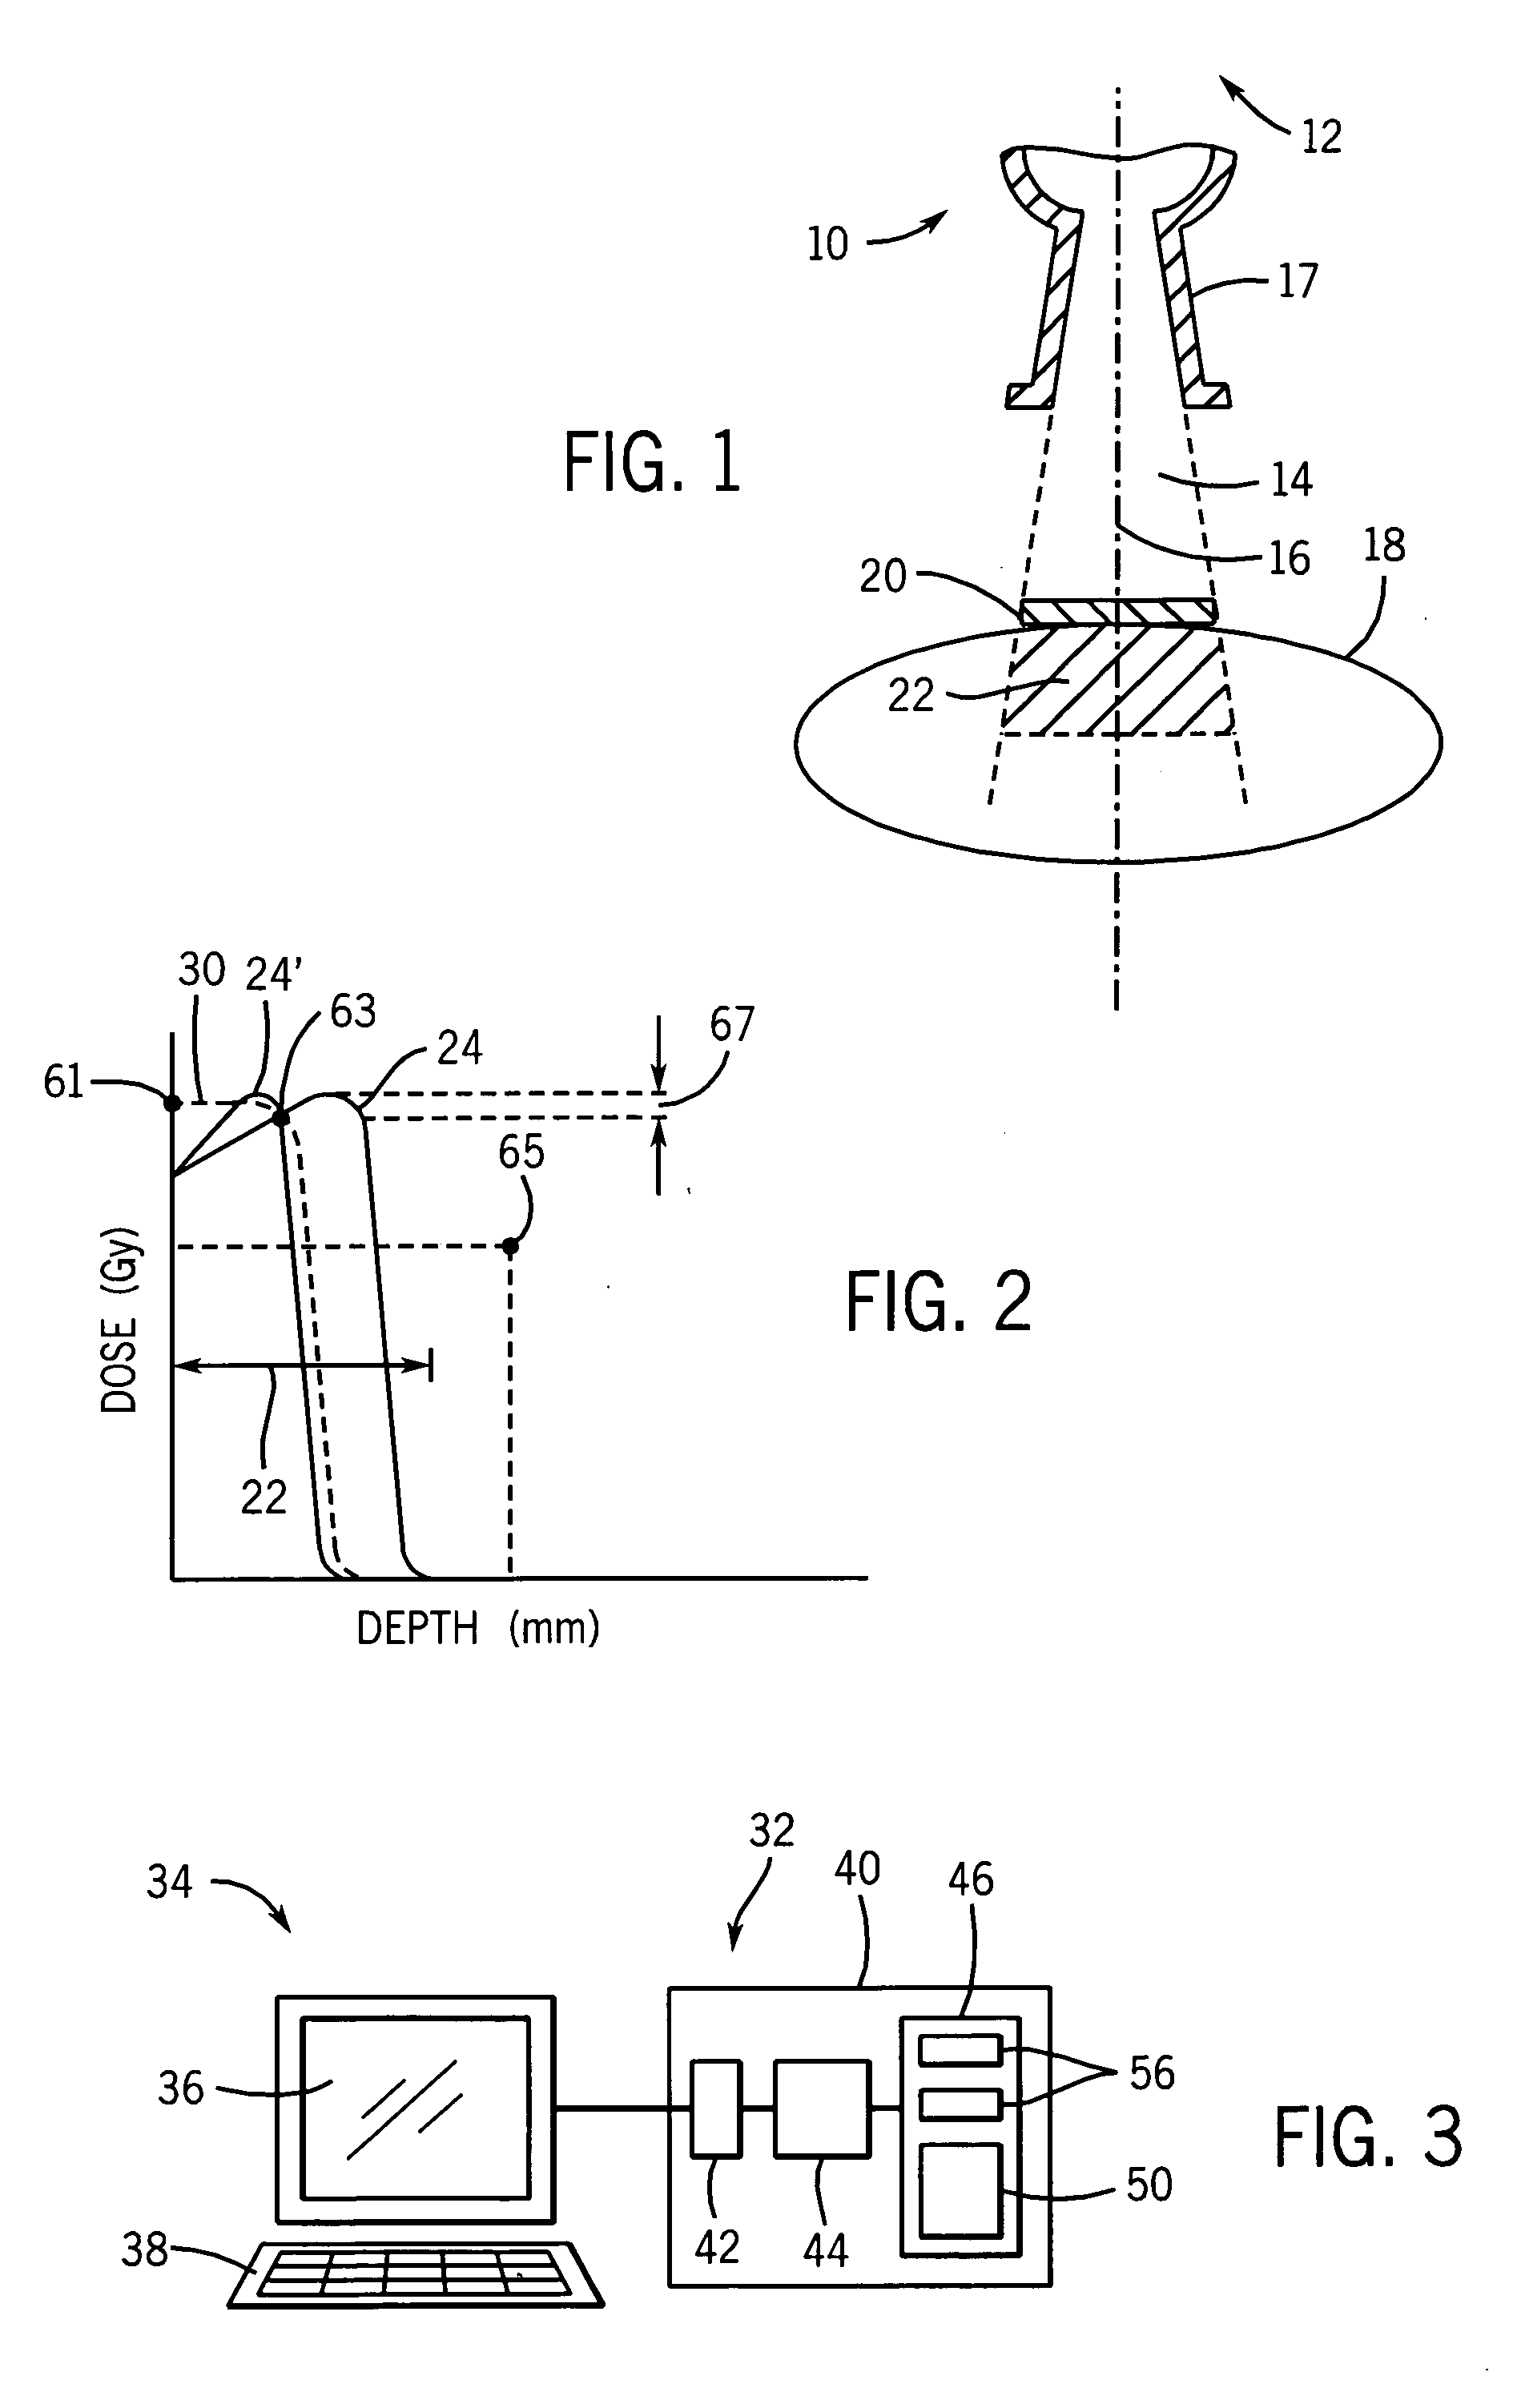 Treatment planning tool for multi-energy electron beam radiotherapy